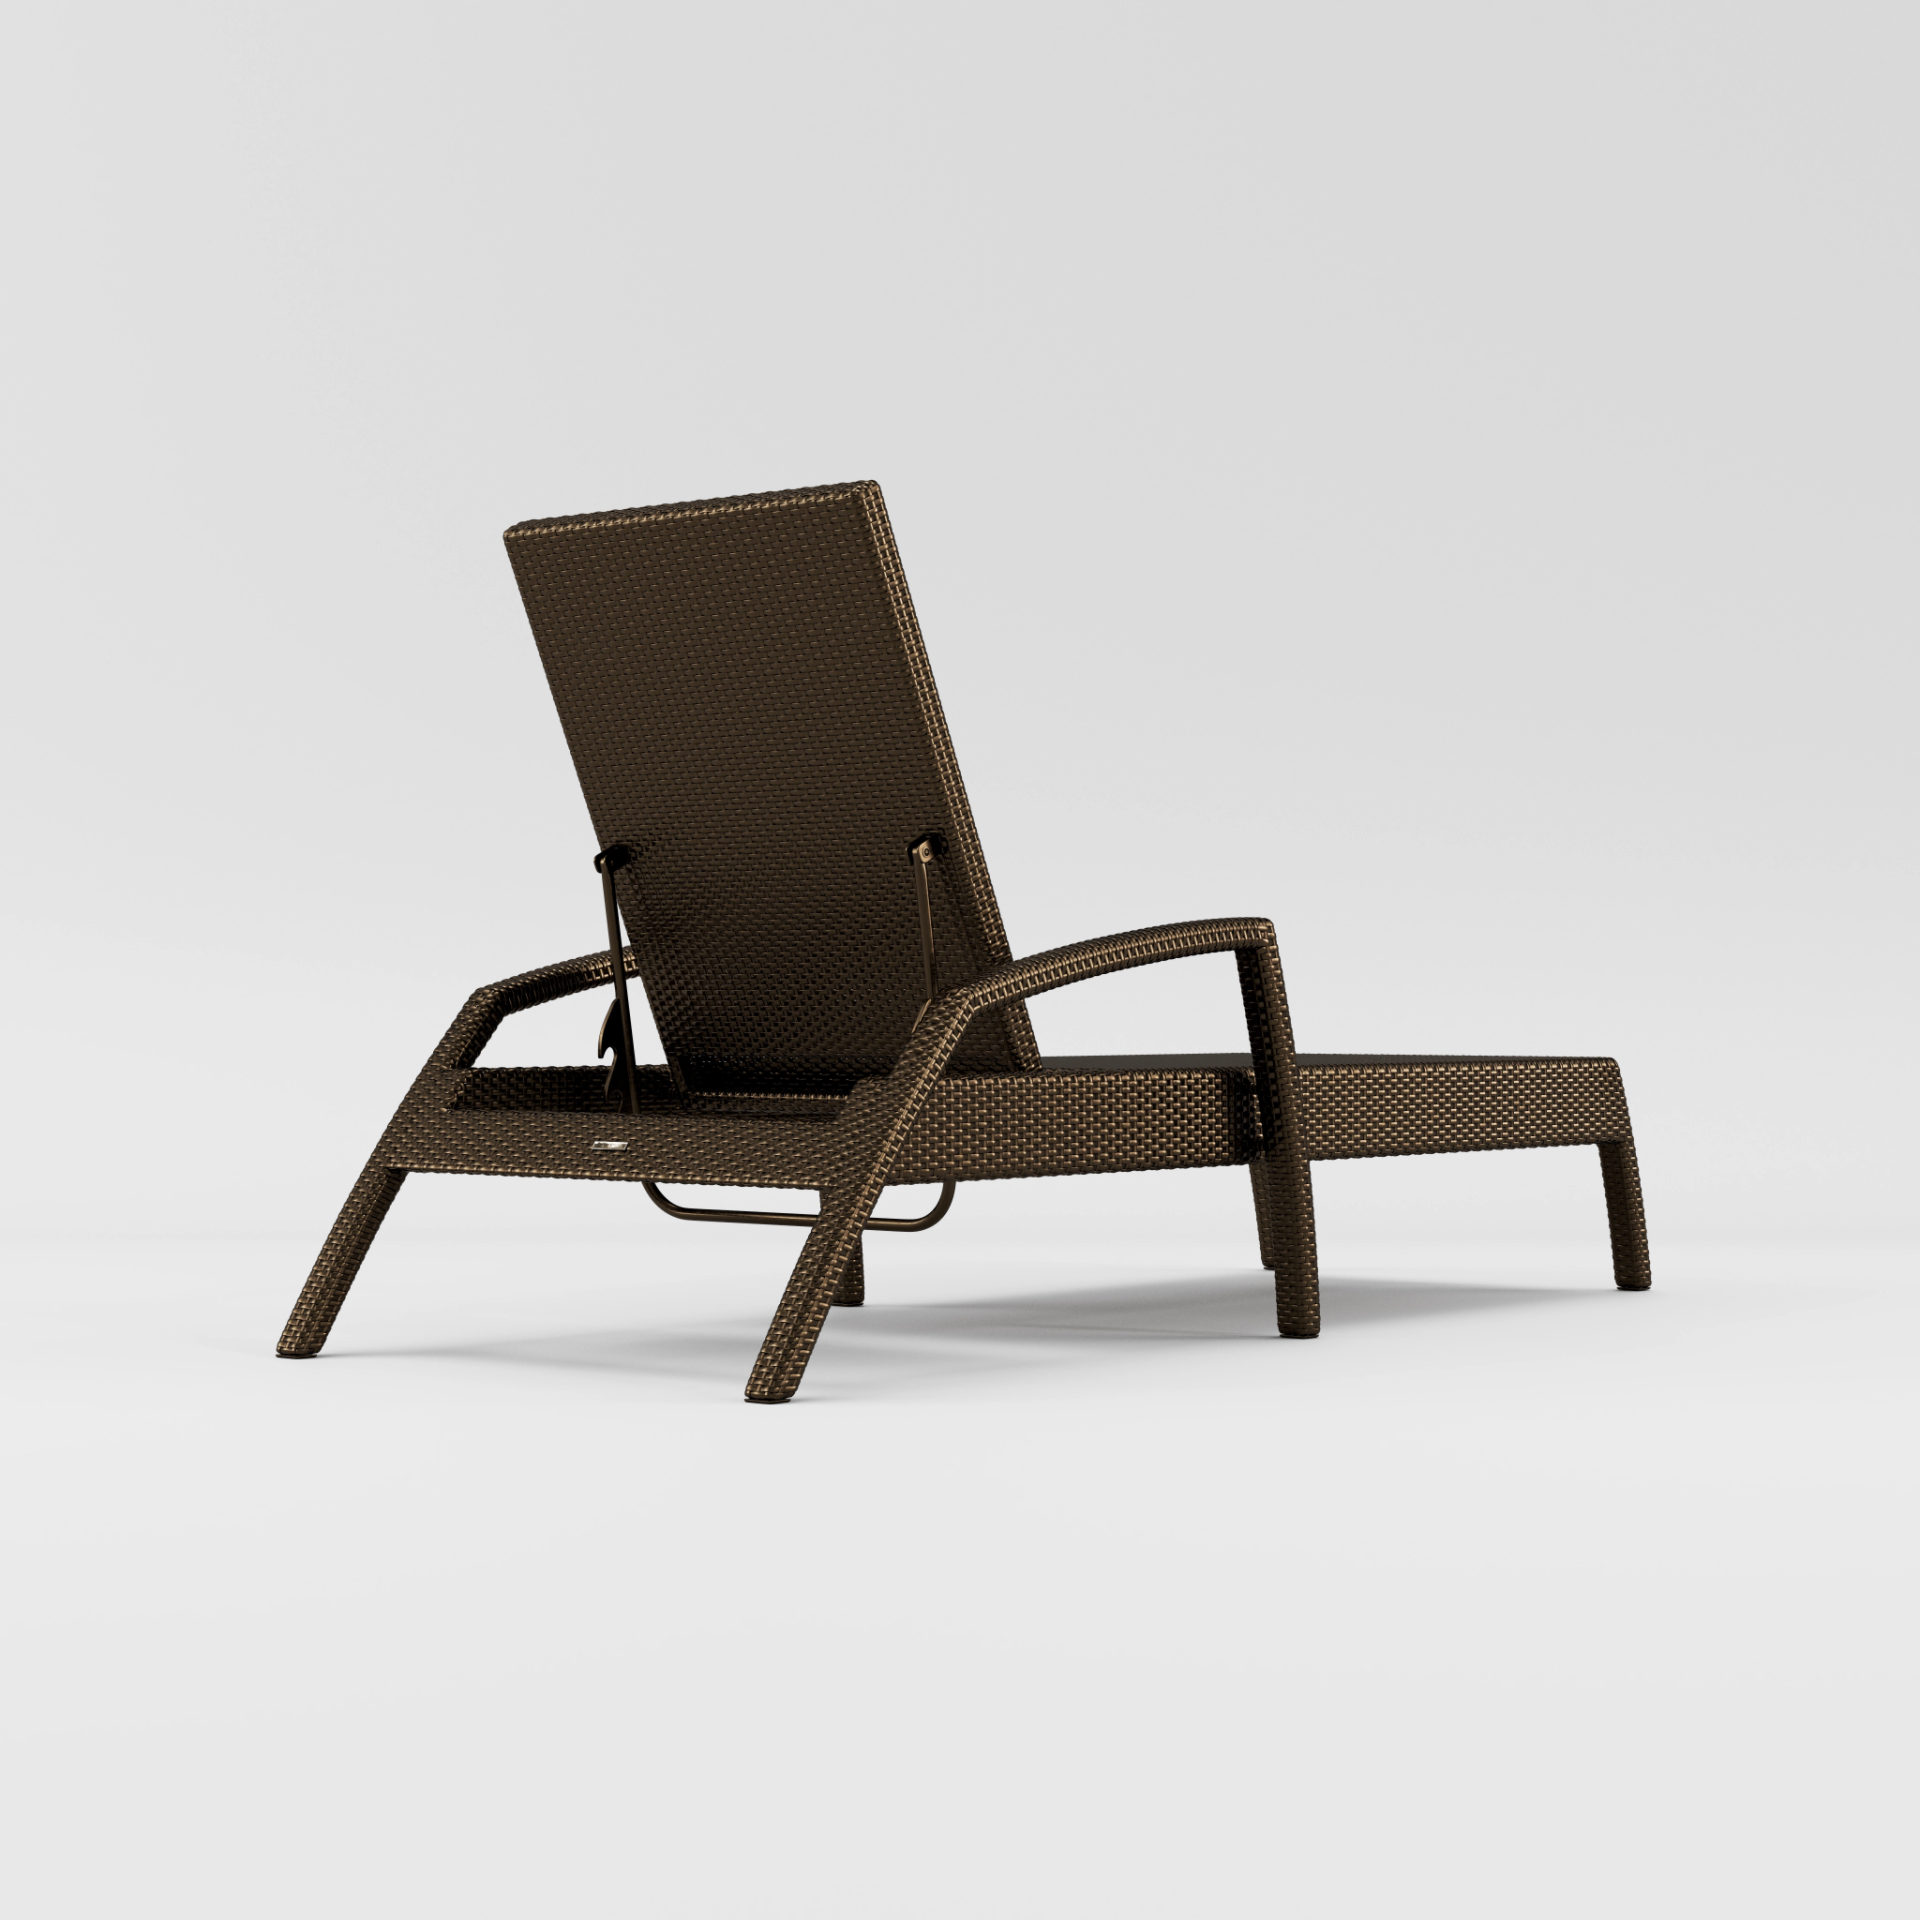 Fusion Stacking Adjustable Chaise by Brown Jordan